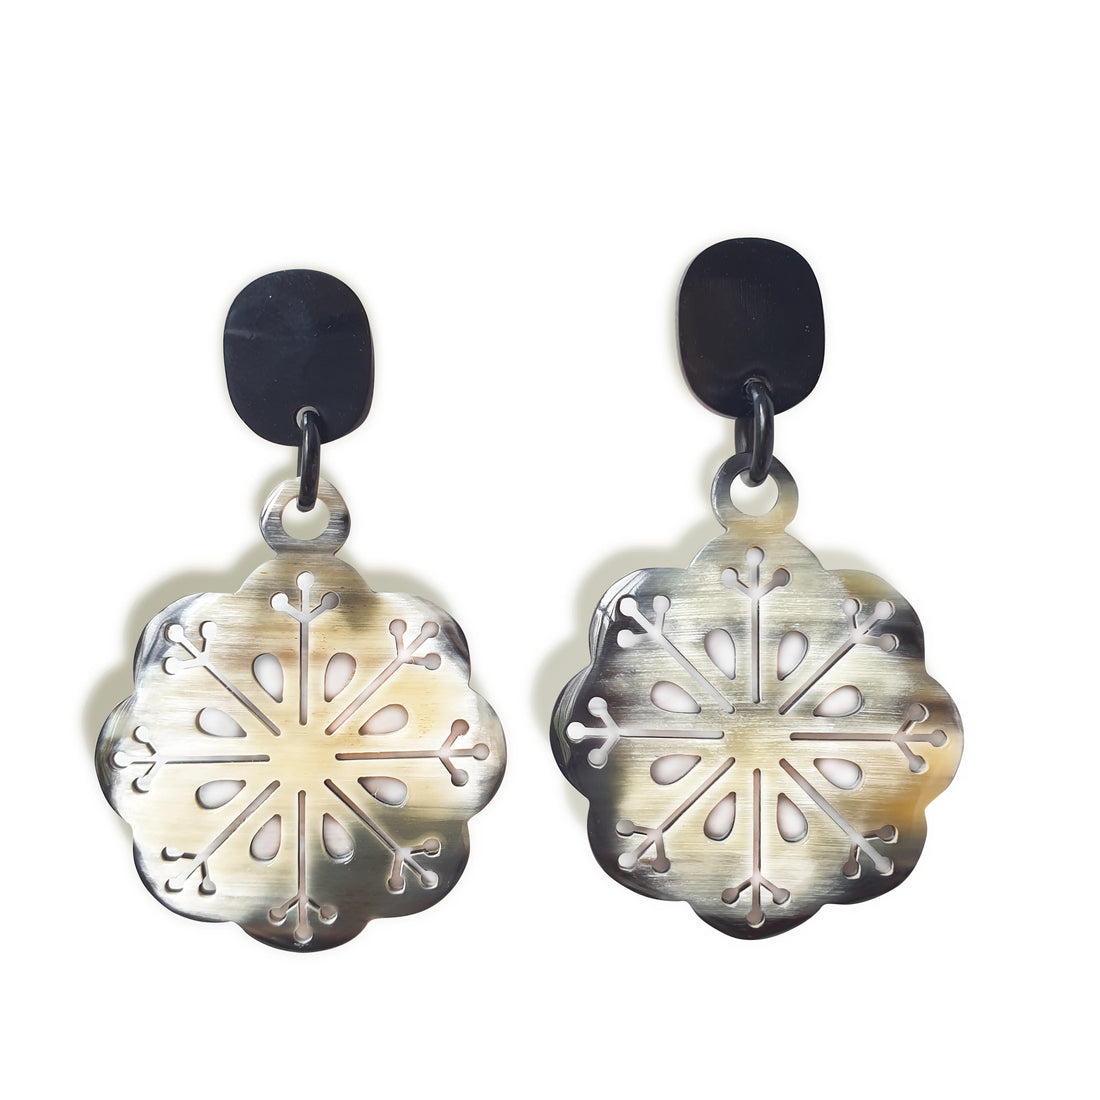 Handmade drop earrings are shaped by snowflakes with white and brown color in the natural light